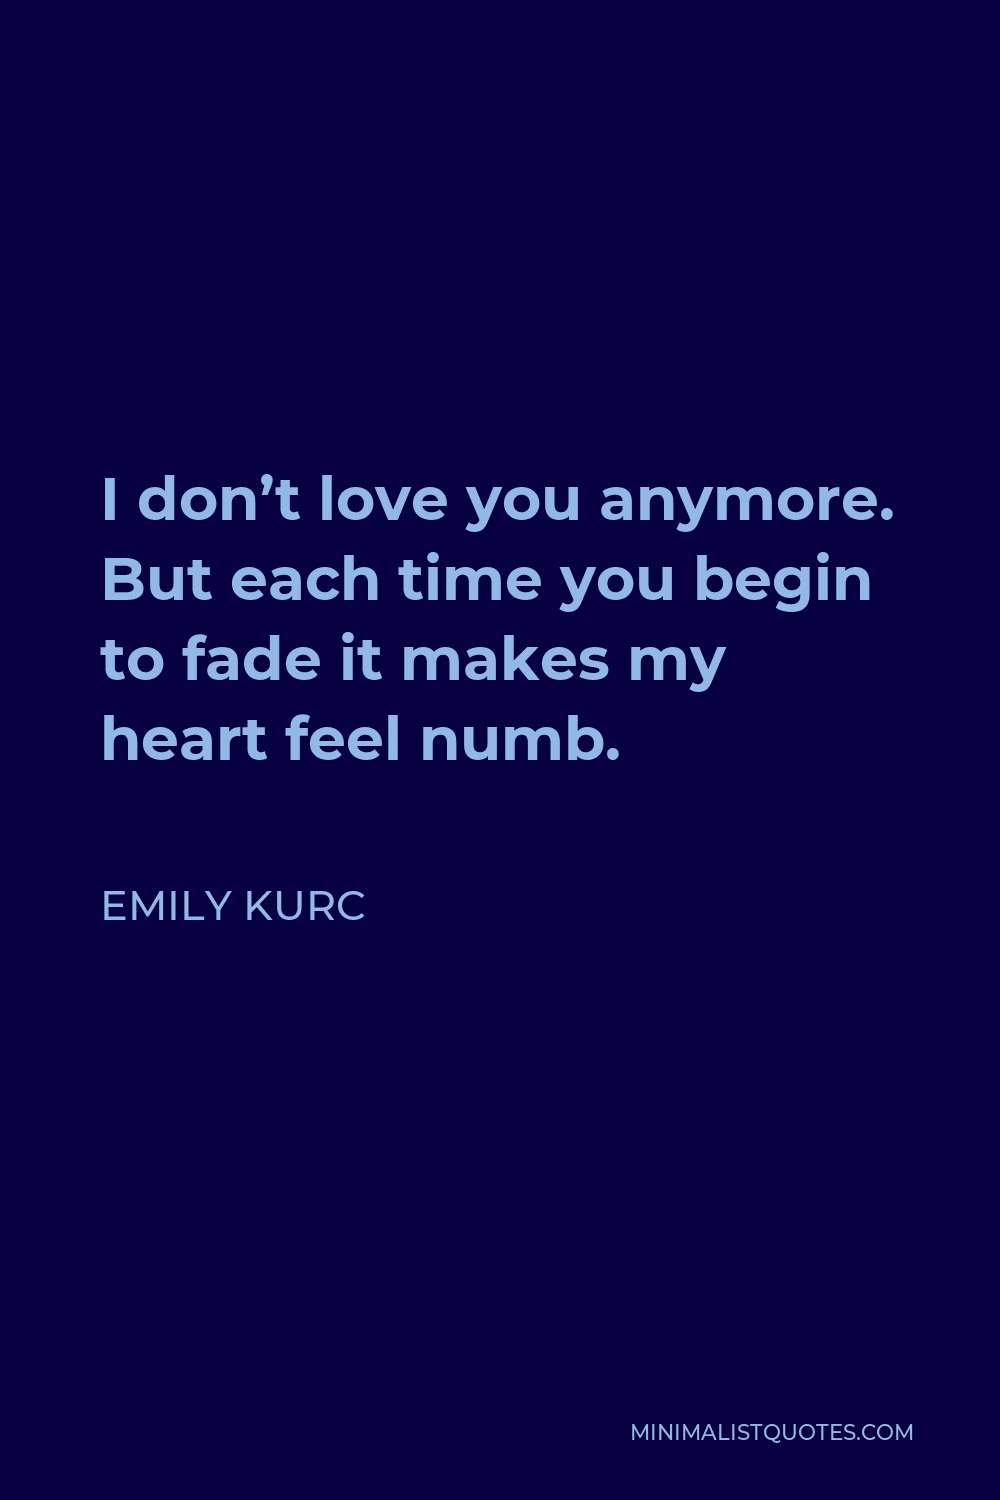 Emily Kurc Quote - I don’t love you anymore. But each time you begin to fade it makes my heart feel numb.